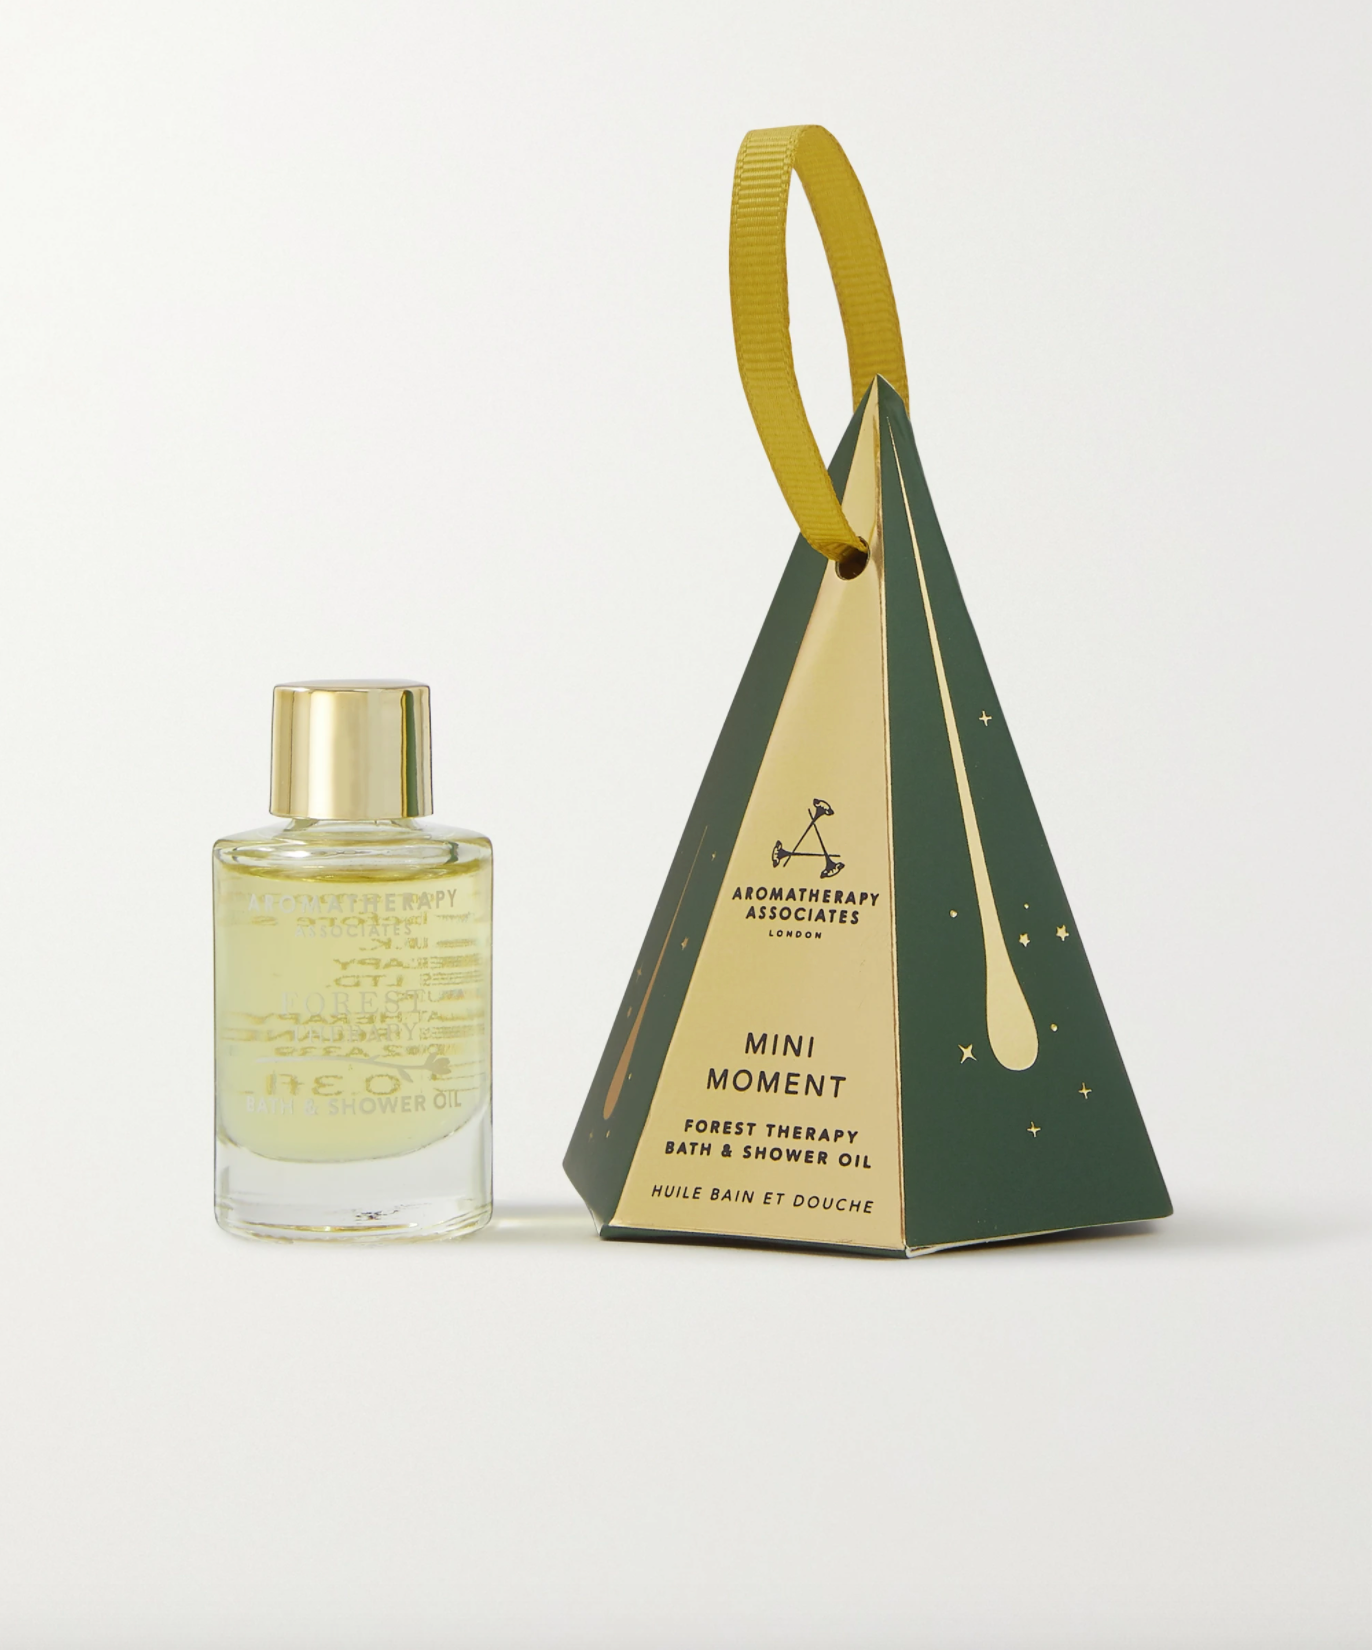 Масло Mini Moment Forest Therapy Bath  Shower Oil Ornament Aromаtherapy Assosiatesnbsp1360 руб.